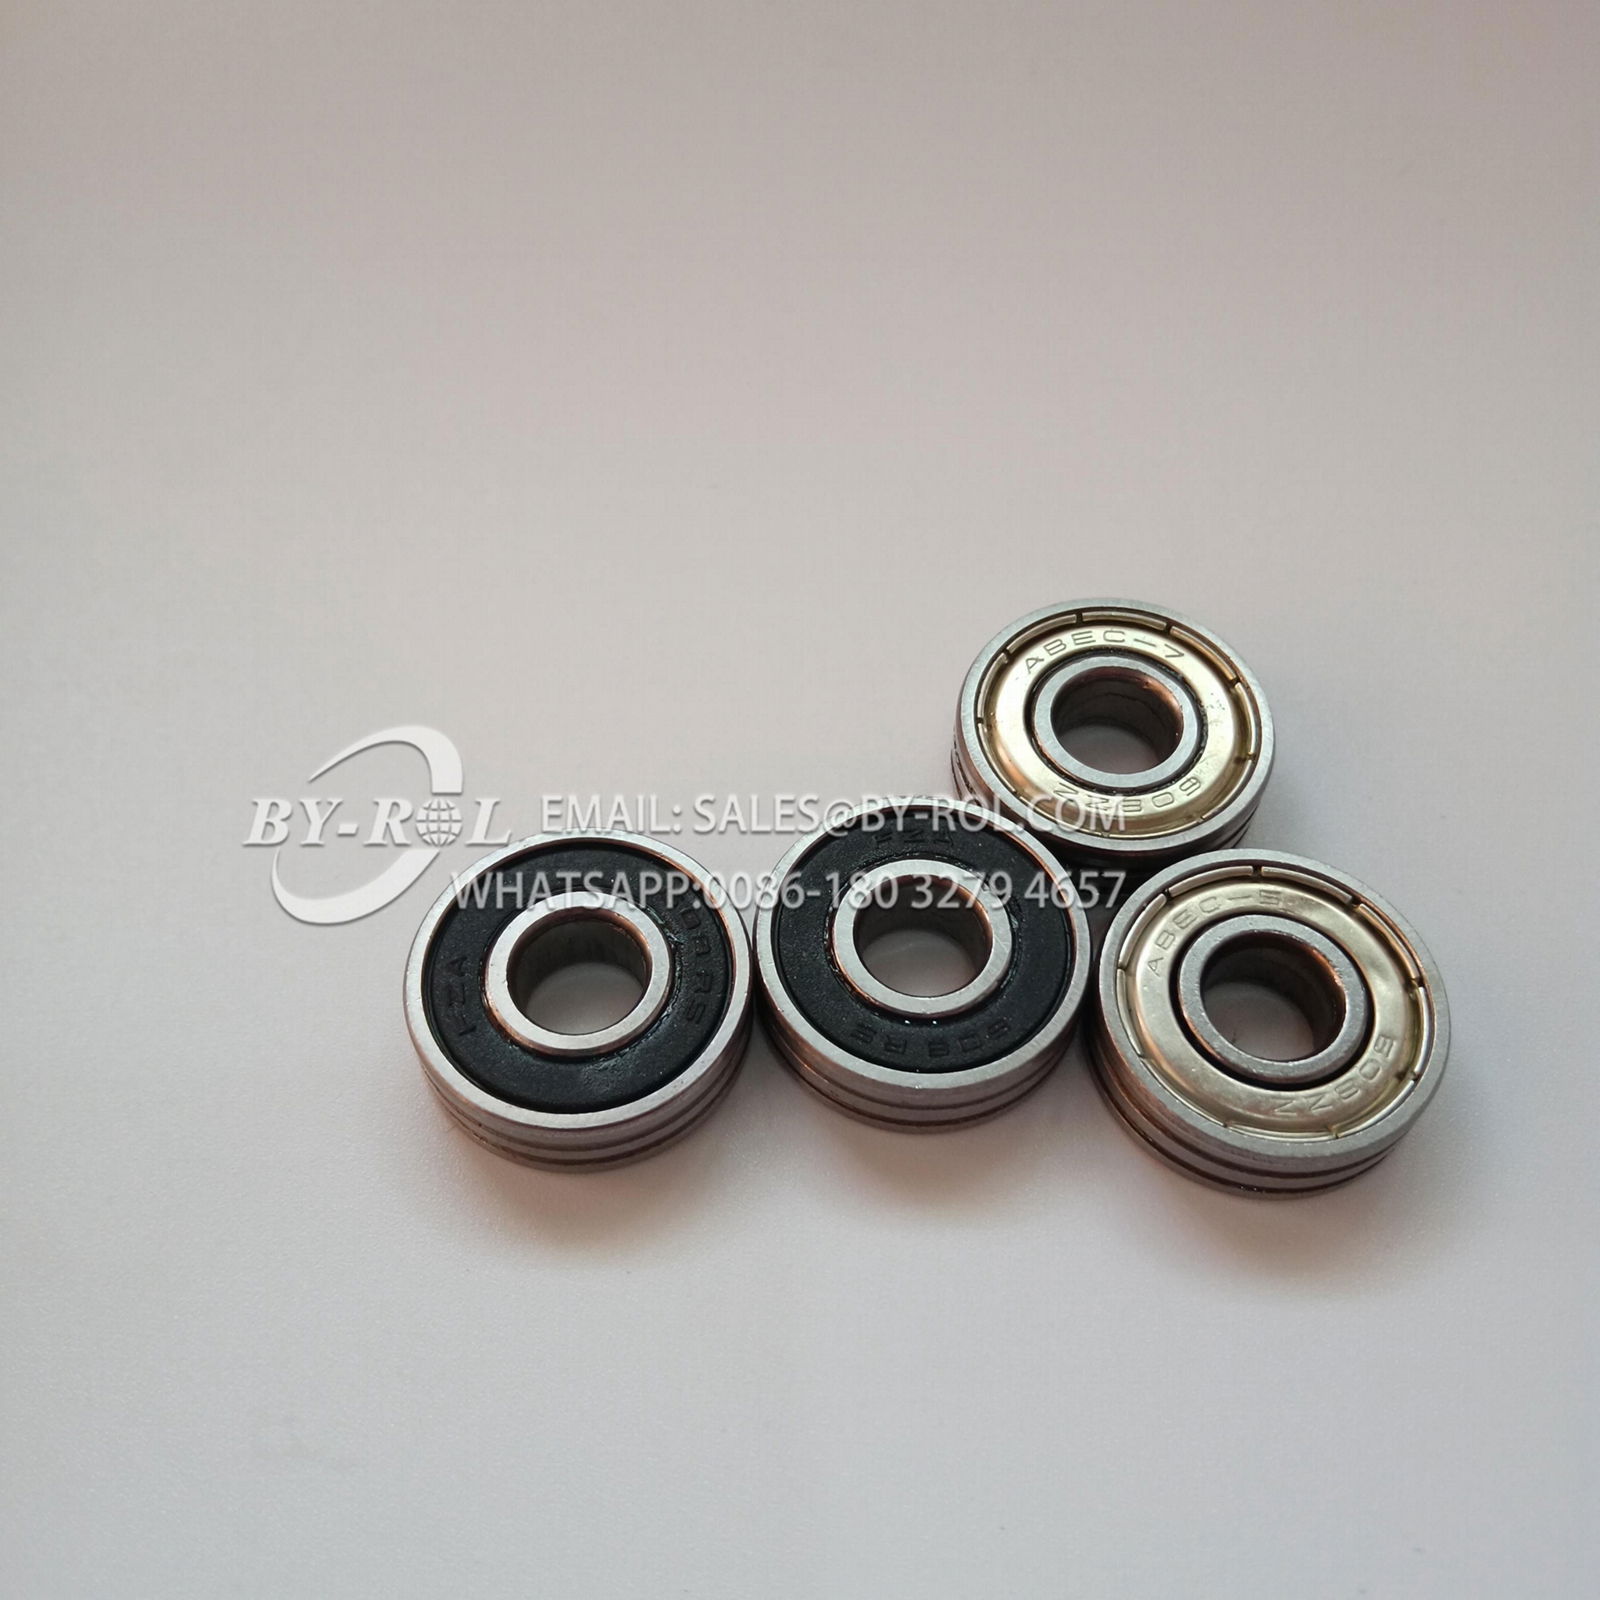 Roller Bearing 626zz 608zz RS with two cavaties/slots for plastic injection 4